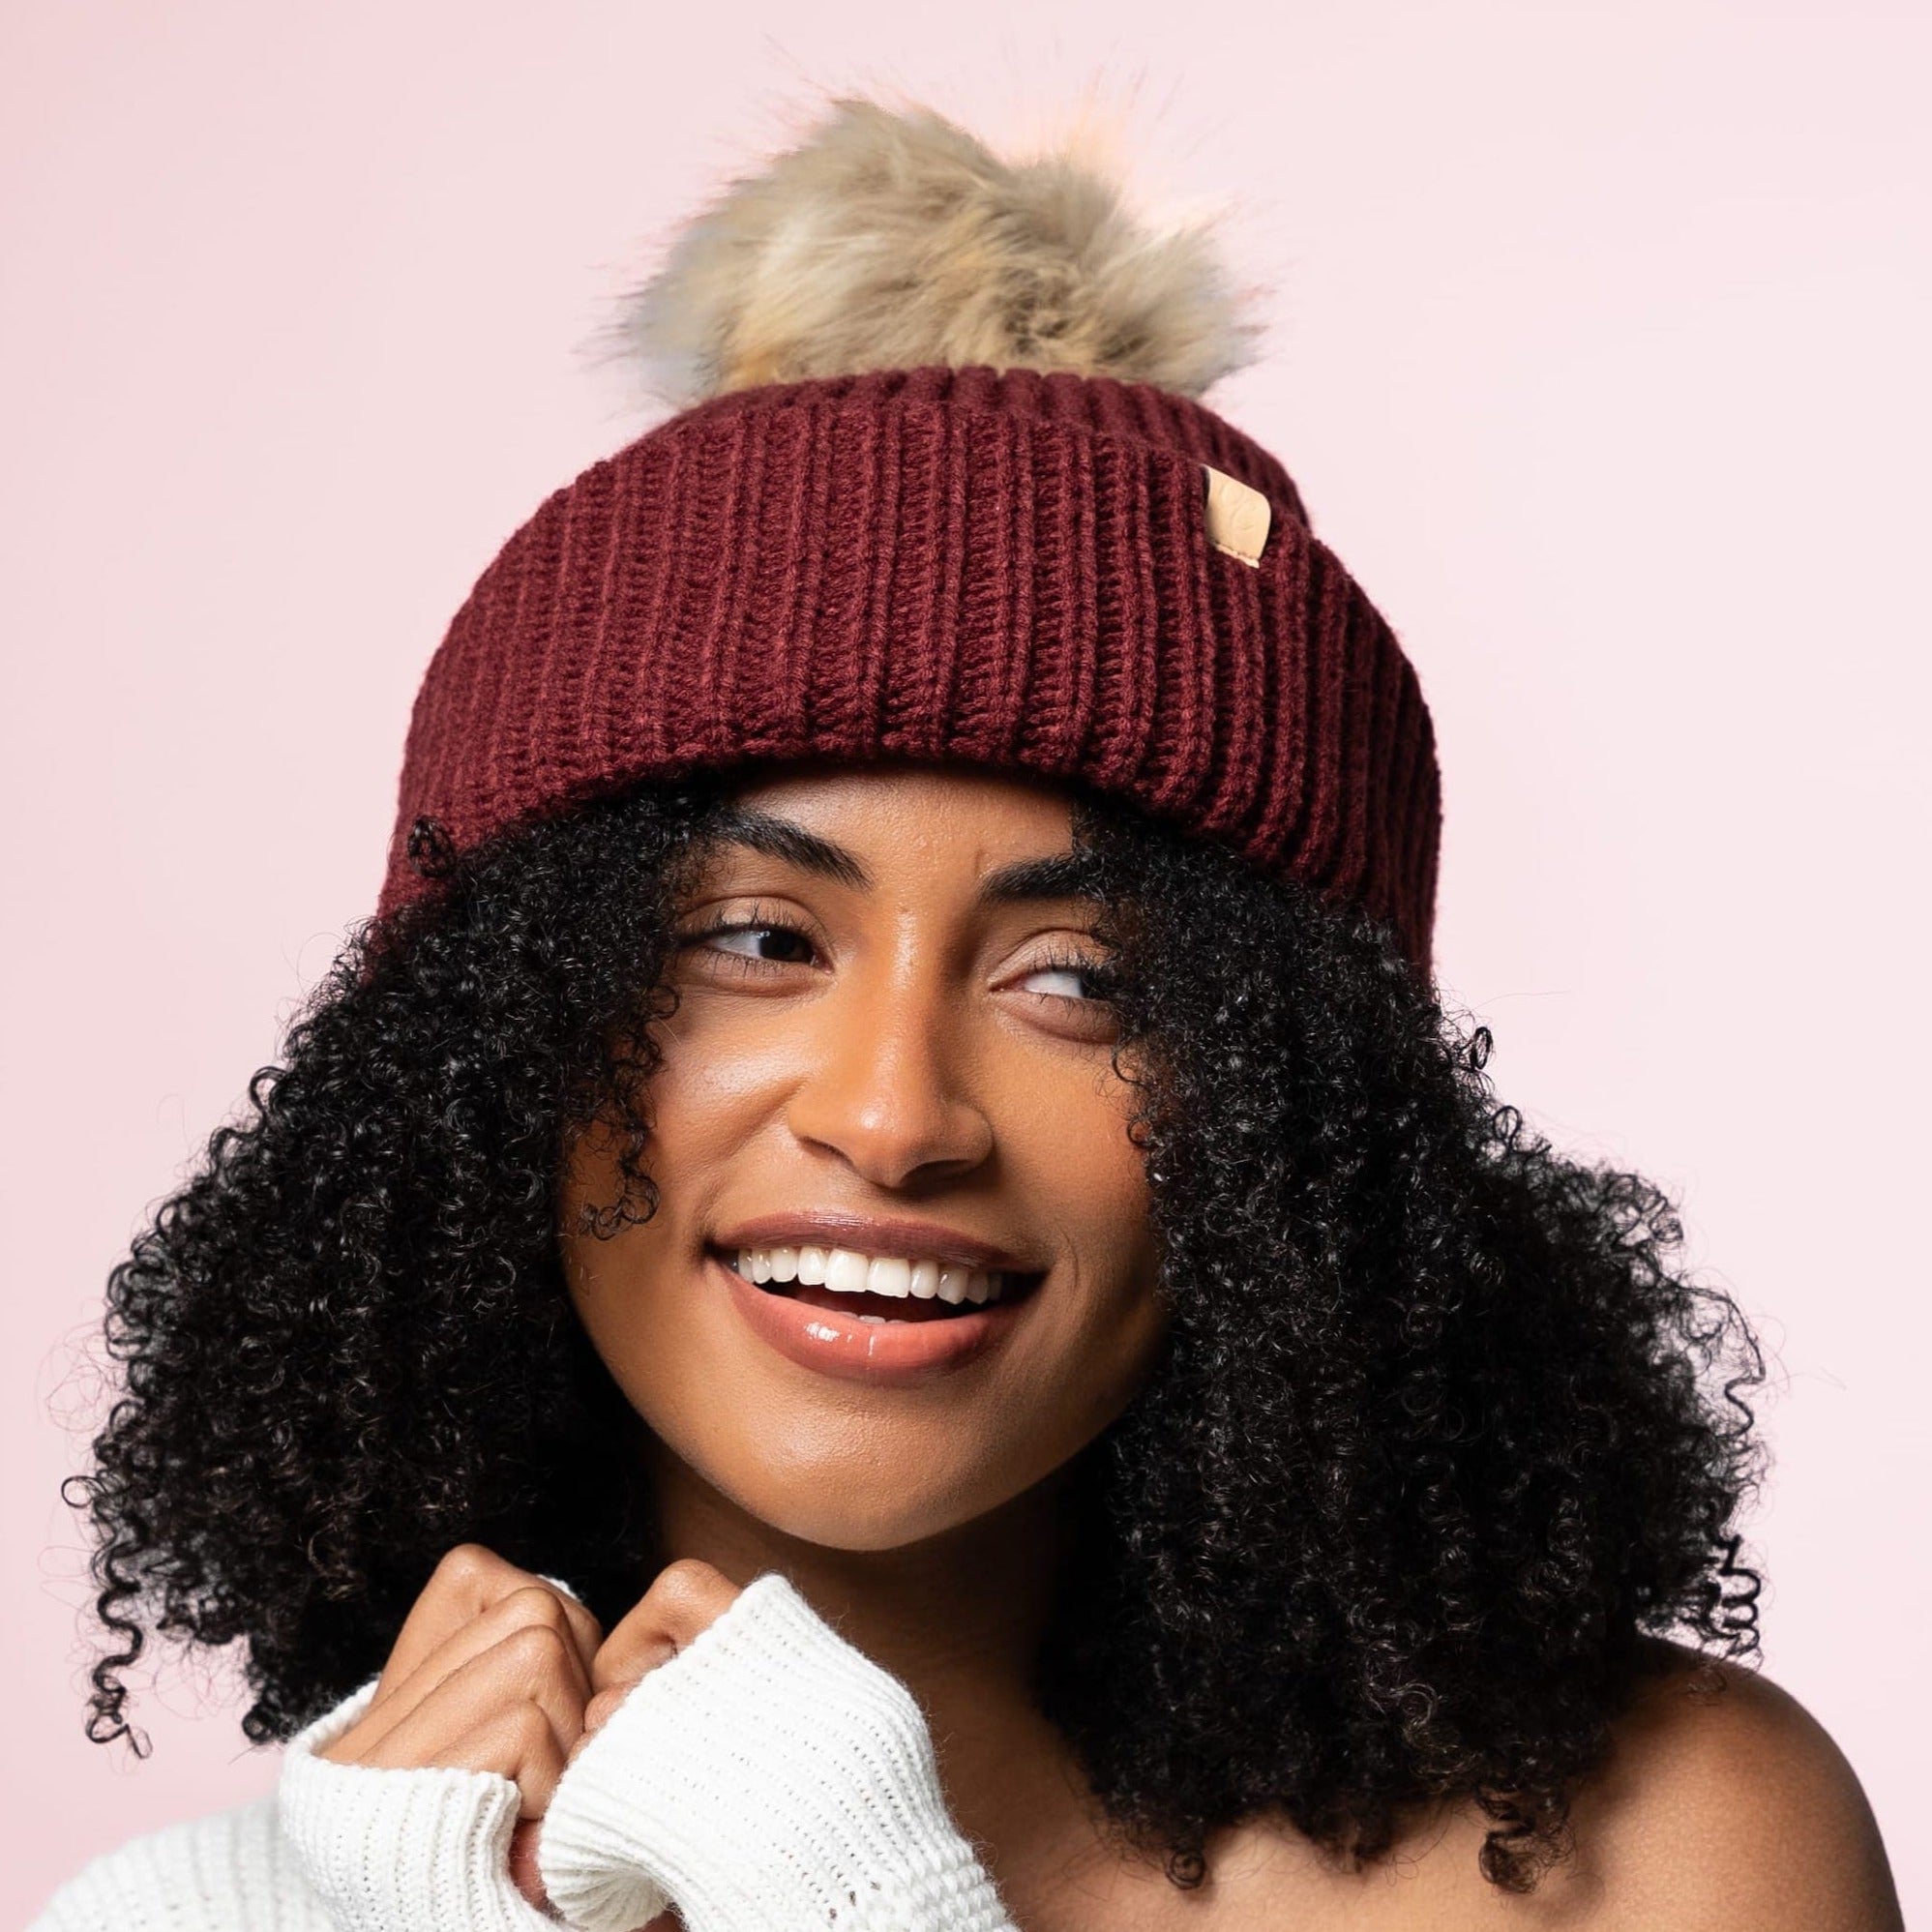 Only Curls Chunky Satin Lined Beanie - Burgundy with Pom Pom - Only Curls